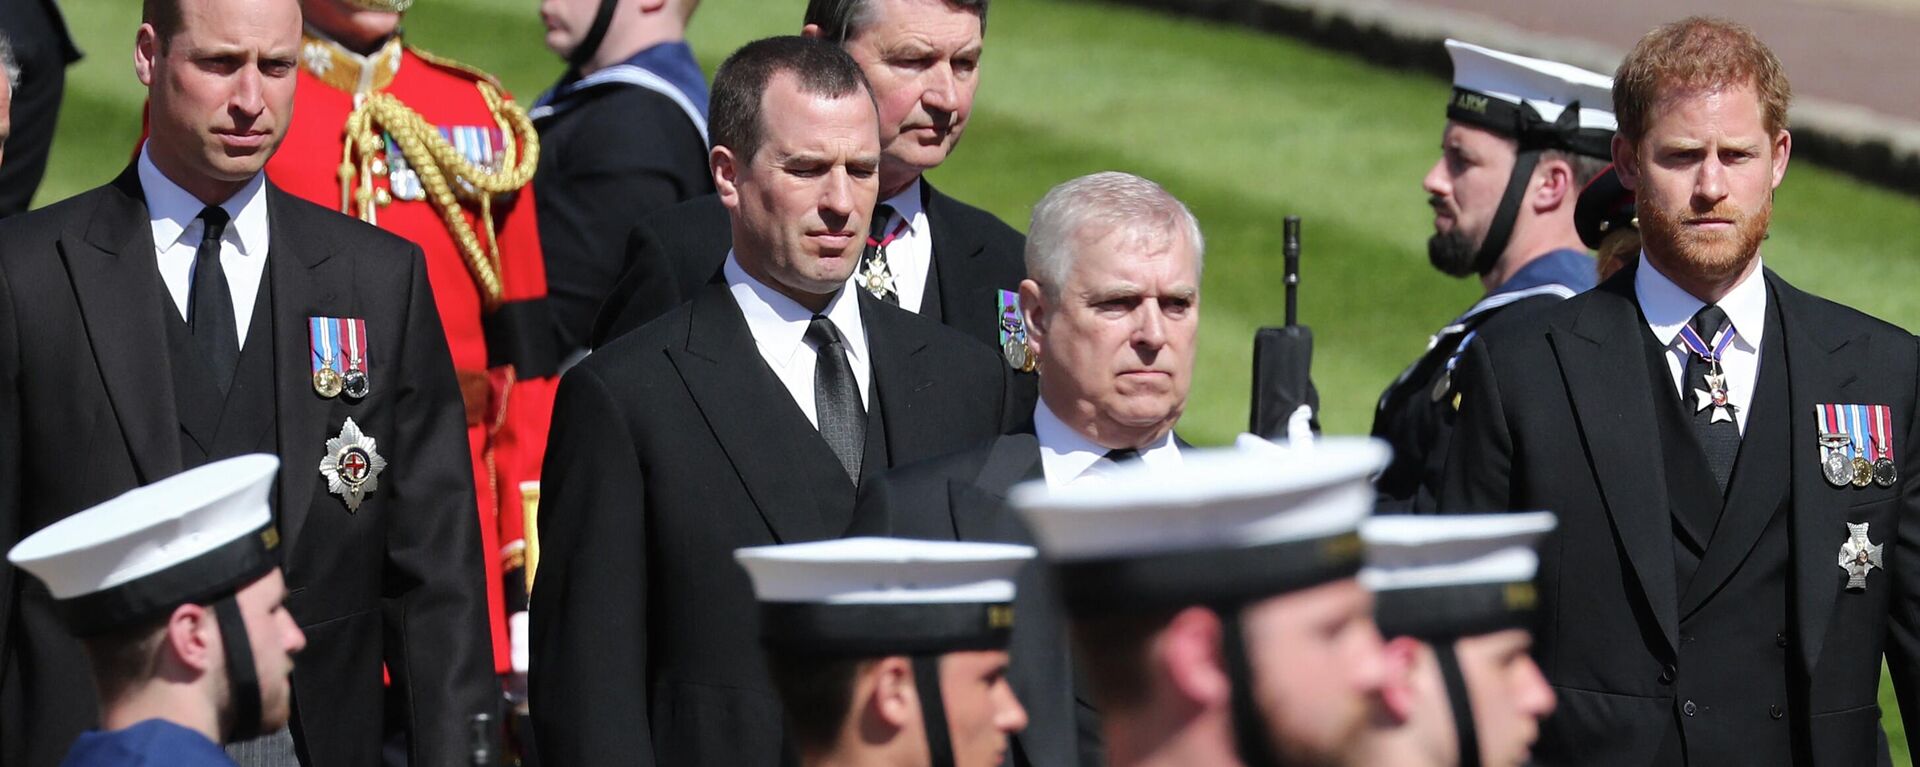 Britain's Prince William, Duke of Cambridge, (L), Britain's Prince Andrew, Duke of York, (2R) and Britain's Prince Harry, Duke of Sussex, (R) follow the coffin during the ceremonial funeral procession of Britain's Prince Philip, Duke of Edinburgh to St George's Chapel in Windsor Castle in Windsor, west of London, on April 17, 2021.  - Sputnik International, 1920, 20.06.2022